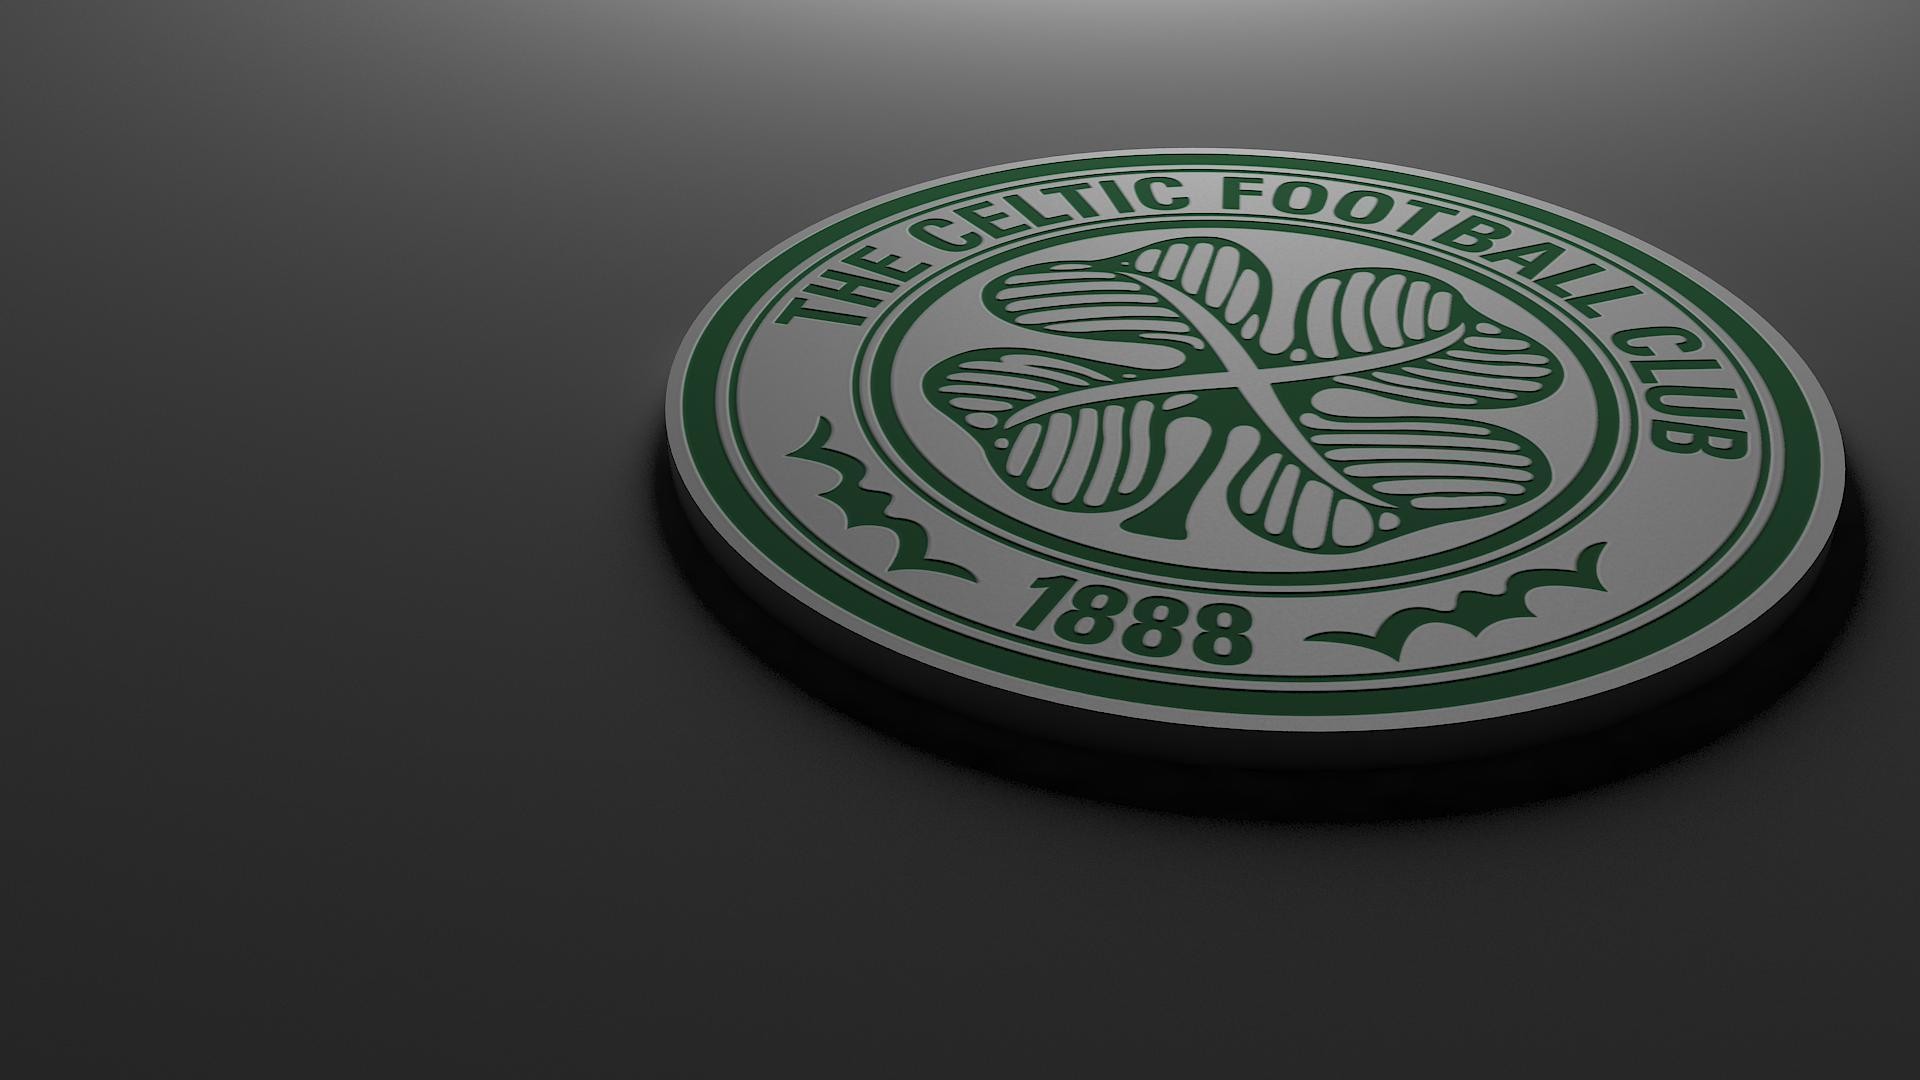 1920x1080 Celtic F.C. Wallpapers